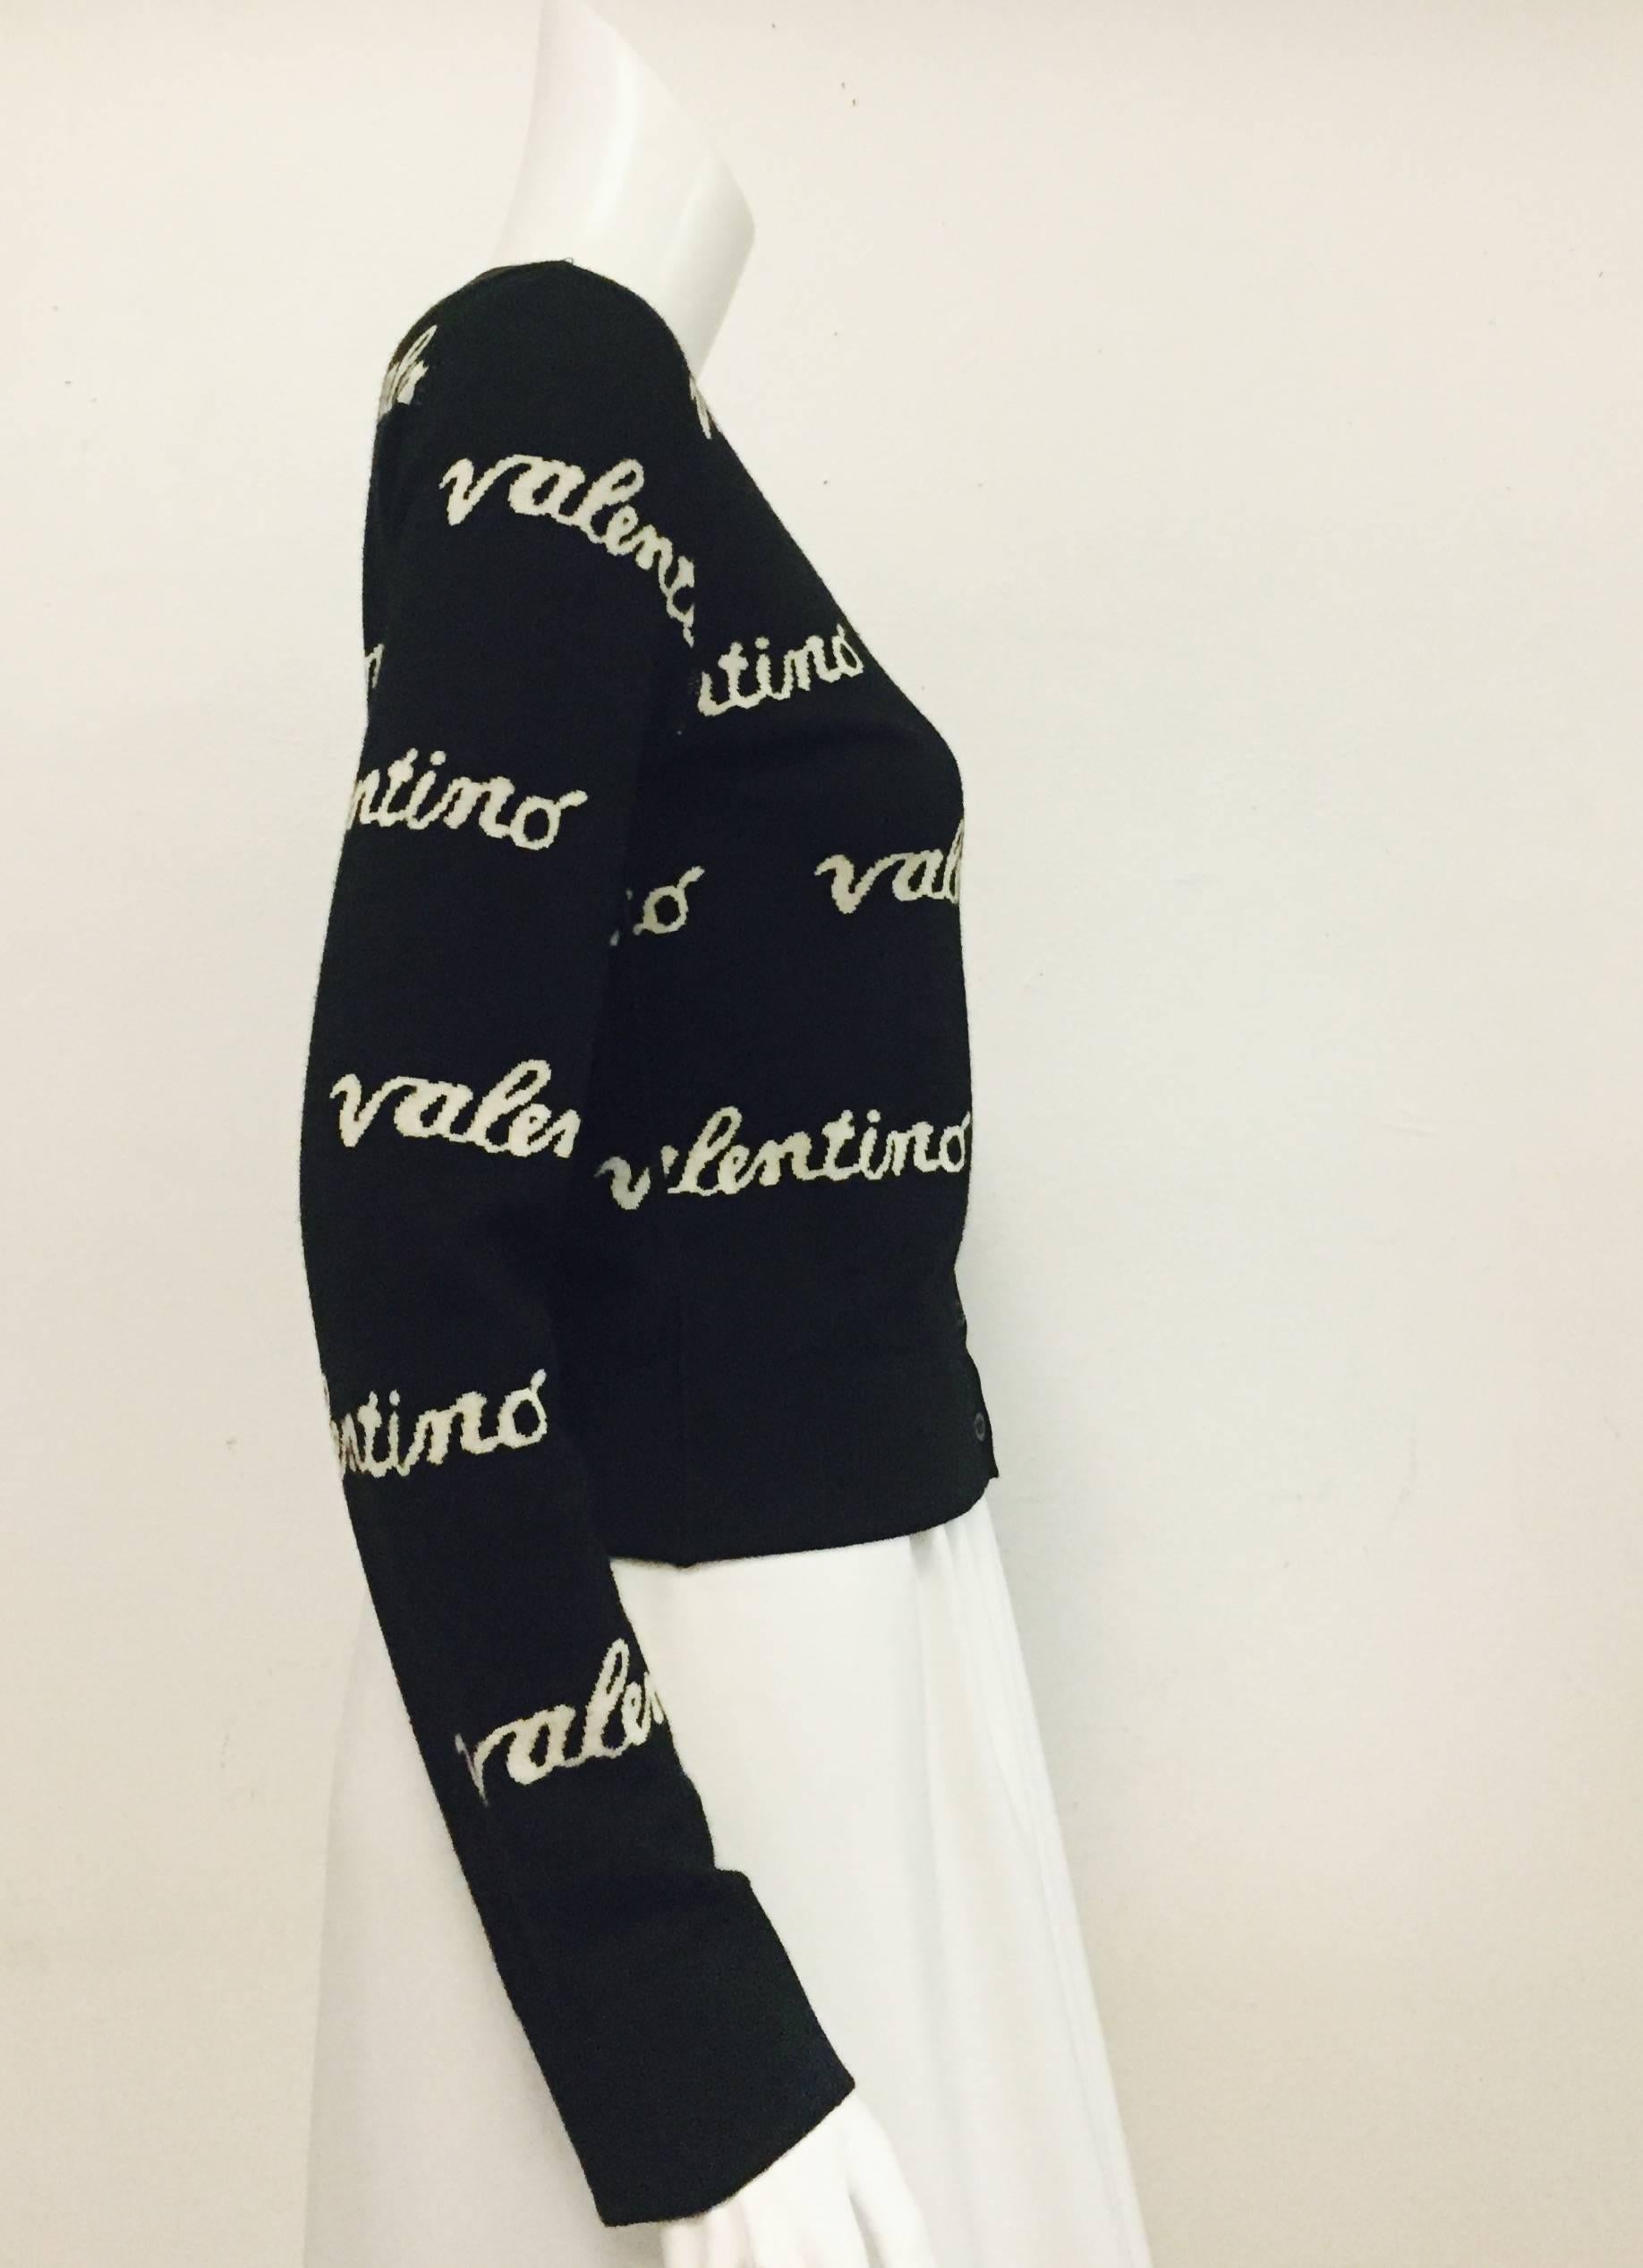 Valentino black and white trendy knit cardigan with Valentino name throughout is a great conversation piece!   This cardigan has a lining made from same knit fabric with the Valentino name in reverse - very unique!  For closure this cardigan has 7